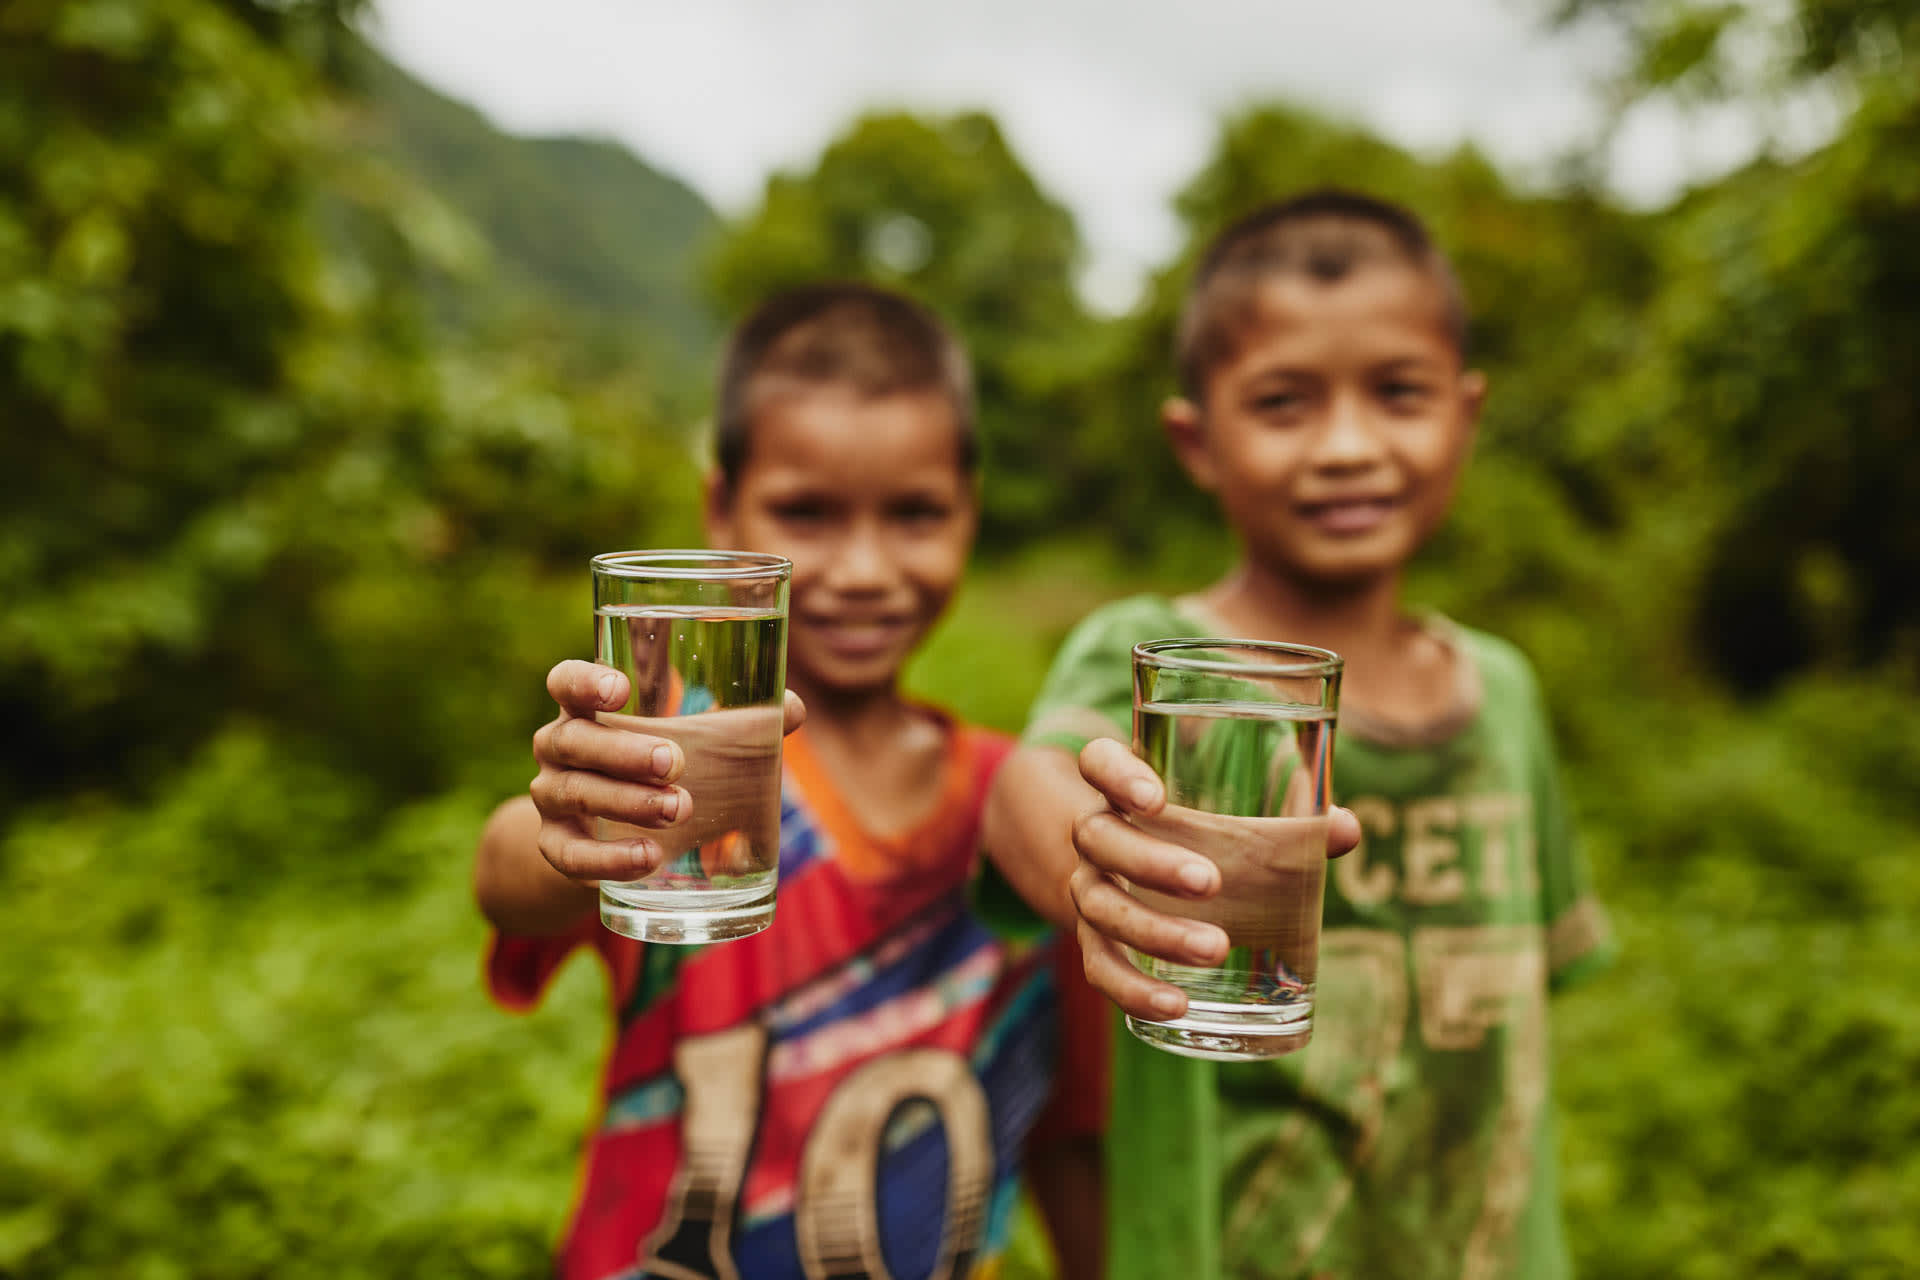 Two boys hold up clear glasses of water. The boys are out of focus and the background is lush jungle.